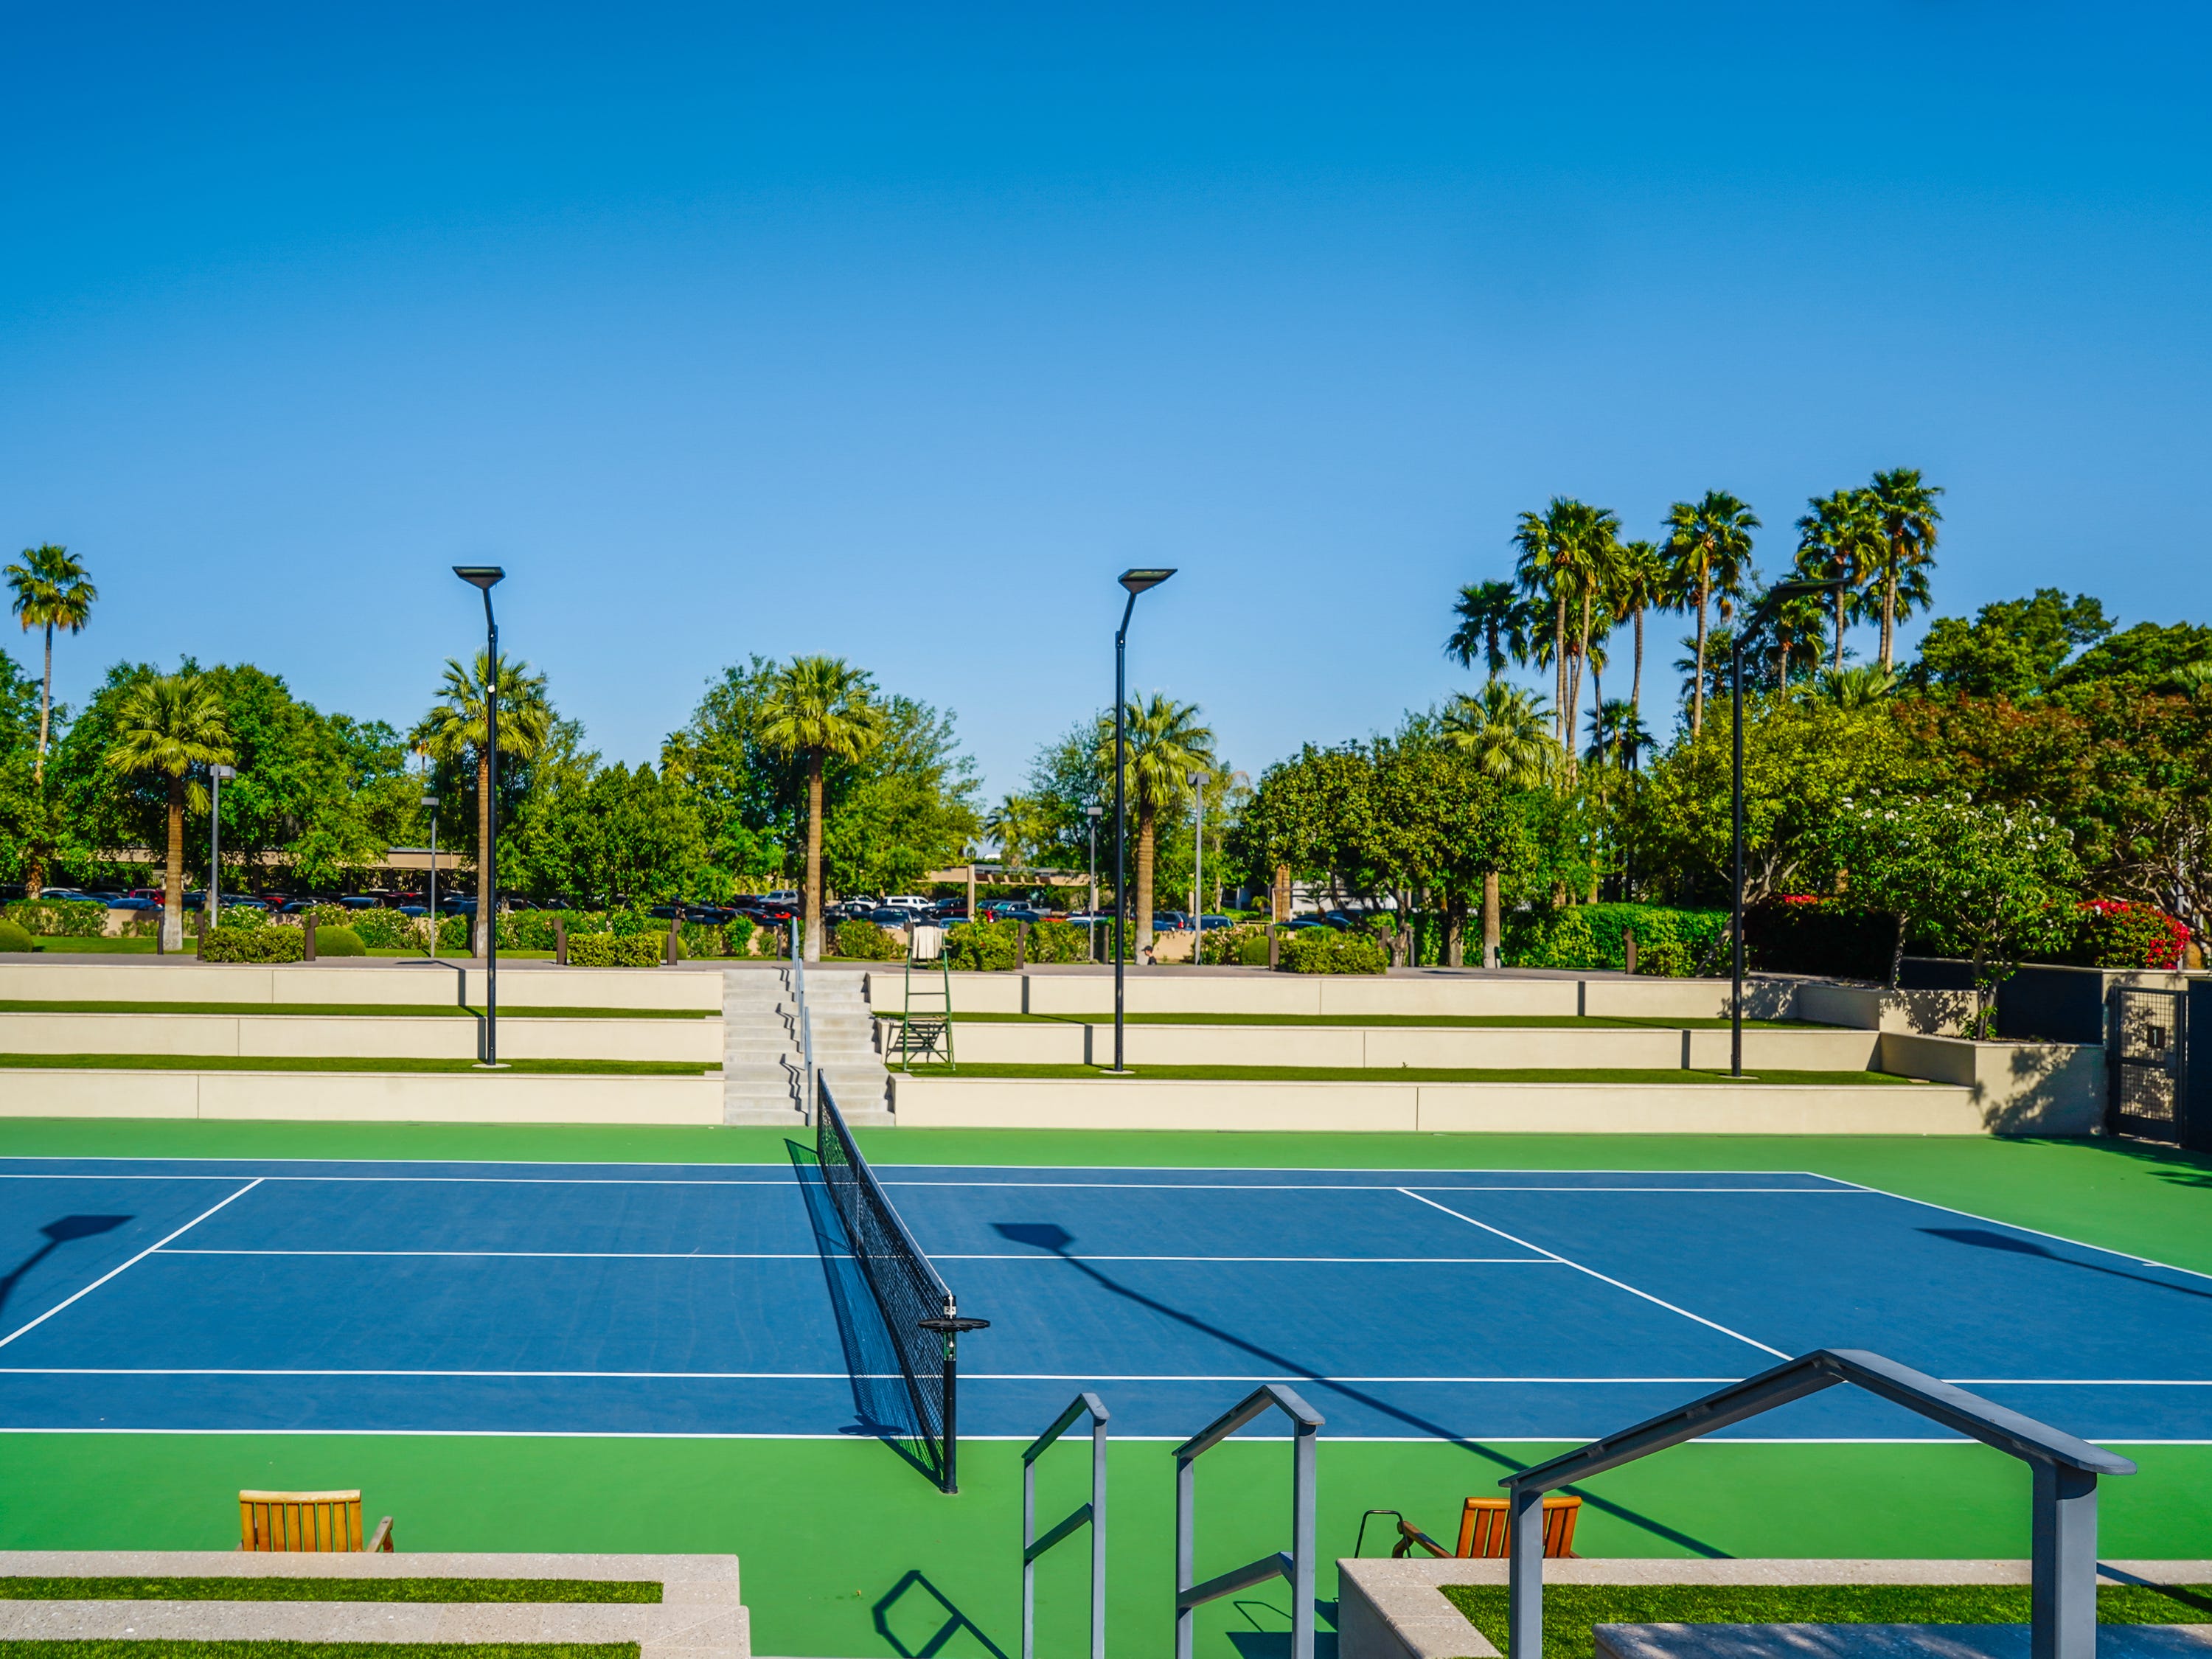 <p>The athletic club has several tennis, pickleball, and basketball courts. </p>